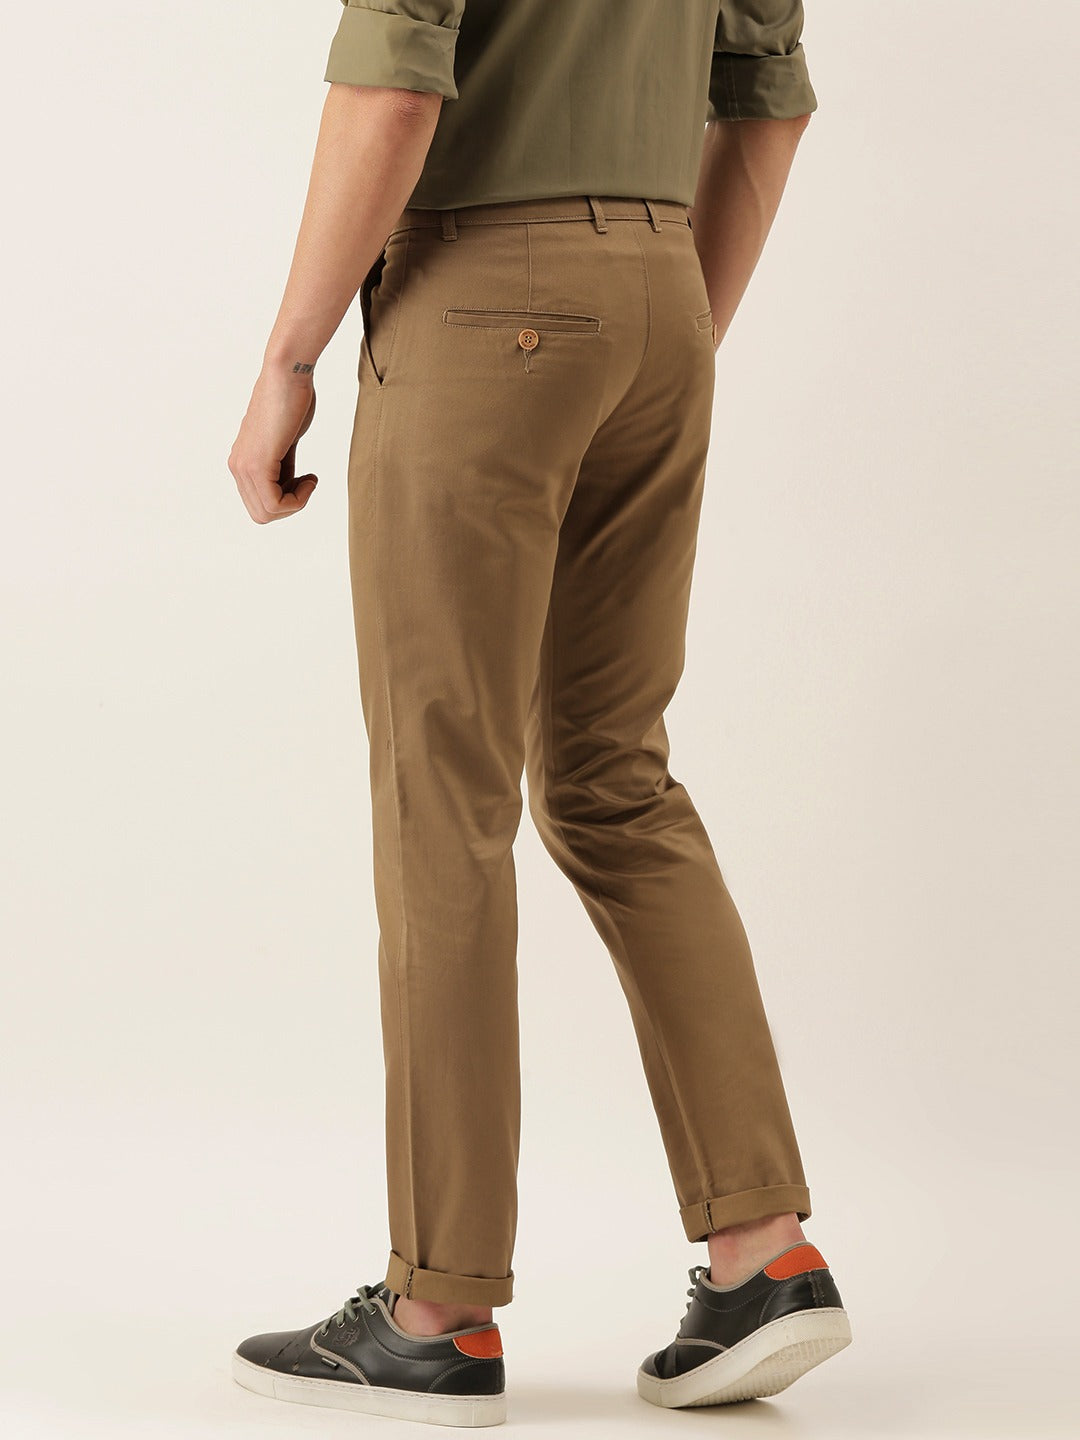 21 Best Work Trousers: GLAMOUR's Edit | Glamour UK